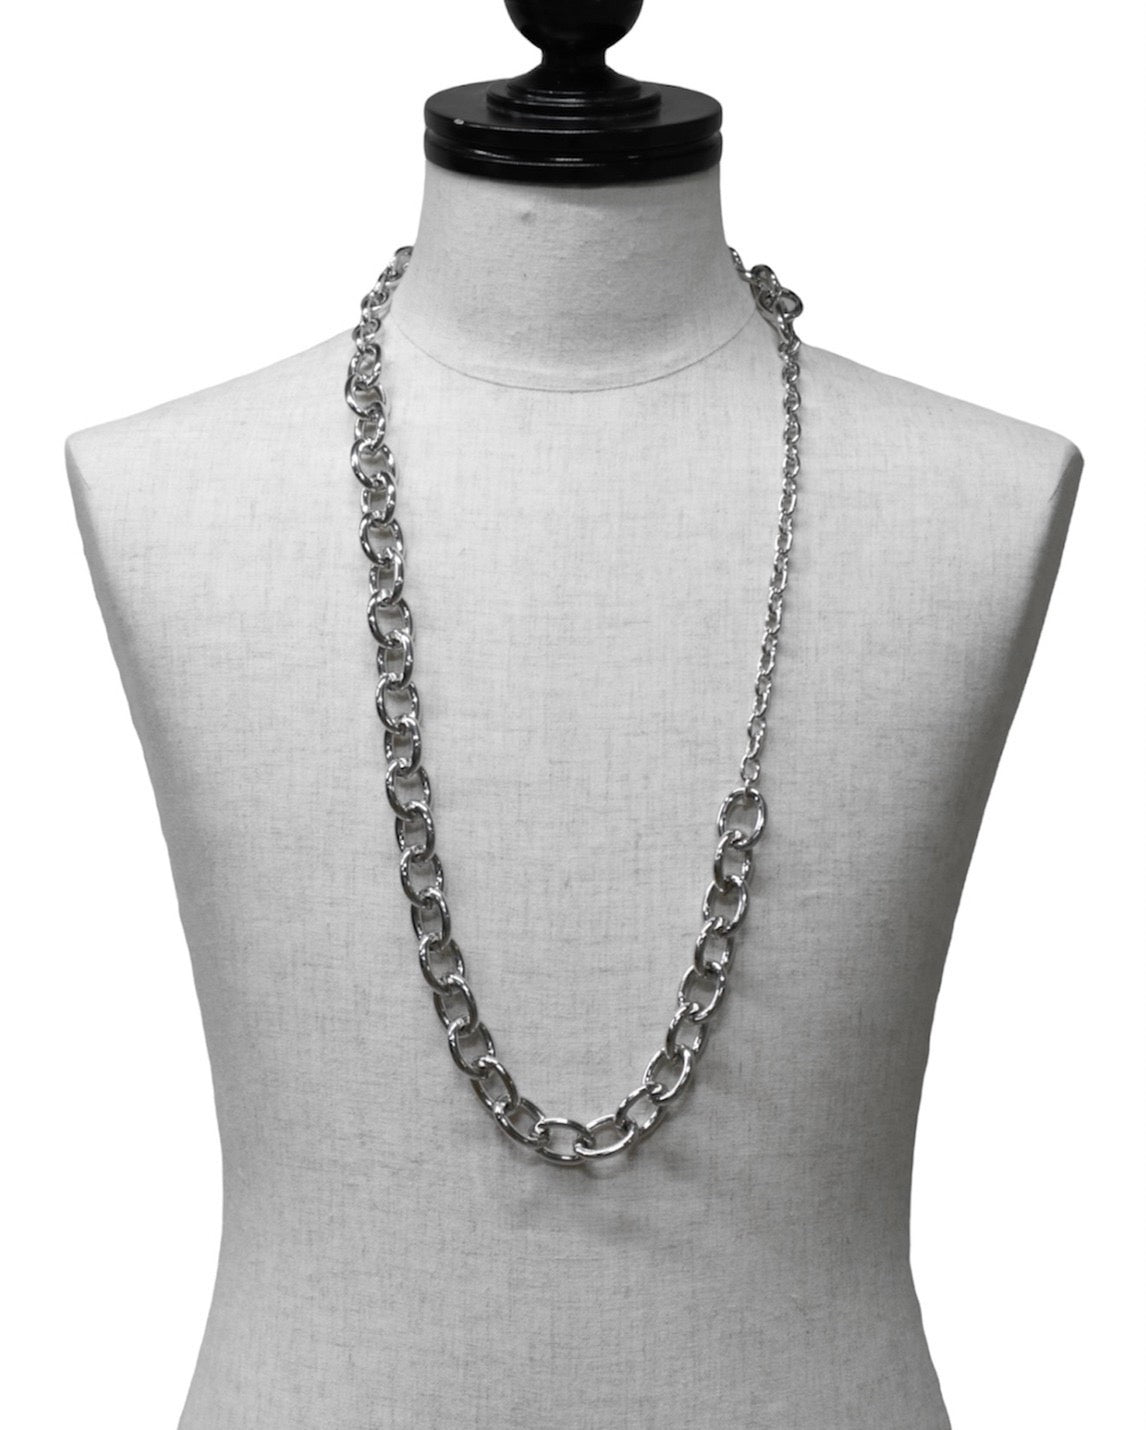 Mix chain 3way necklace (large)